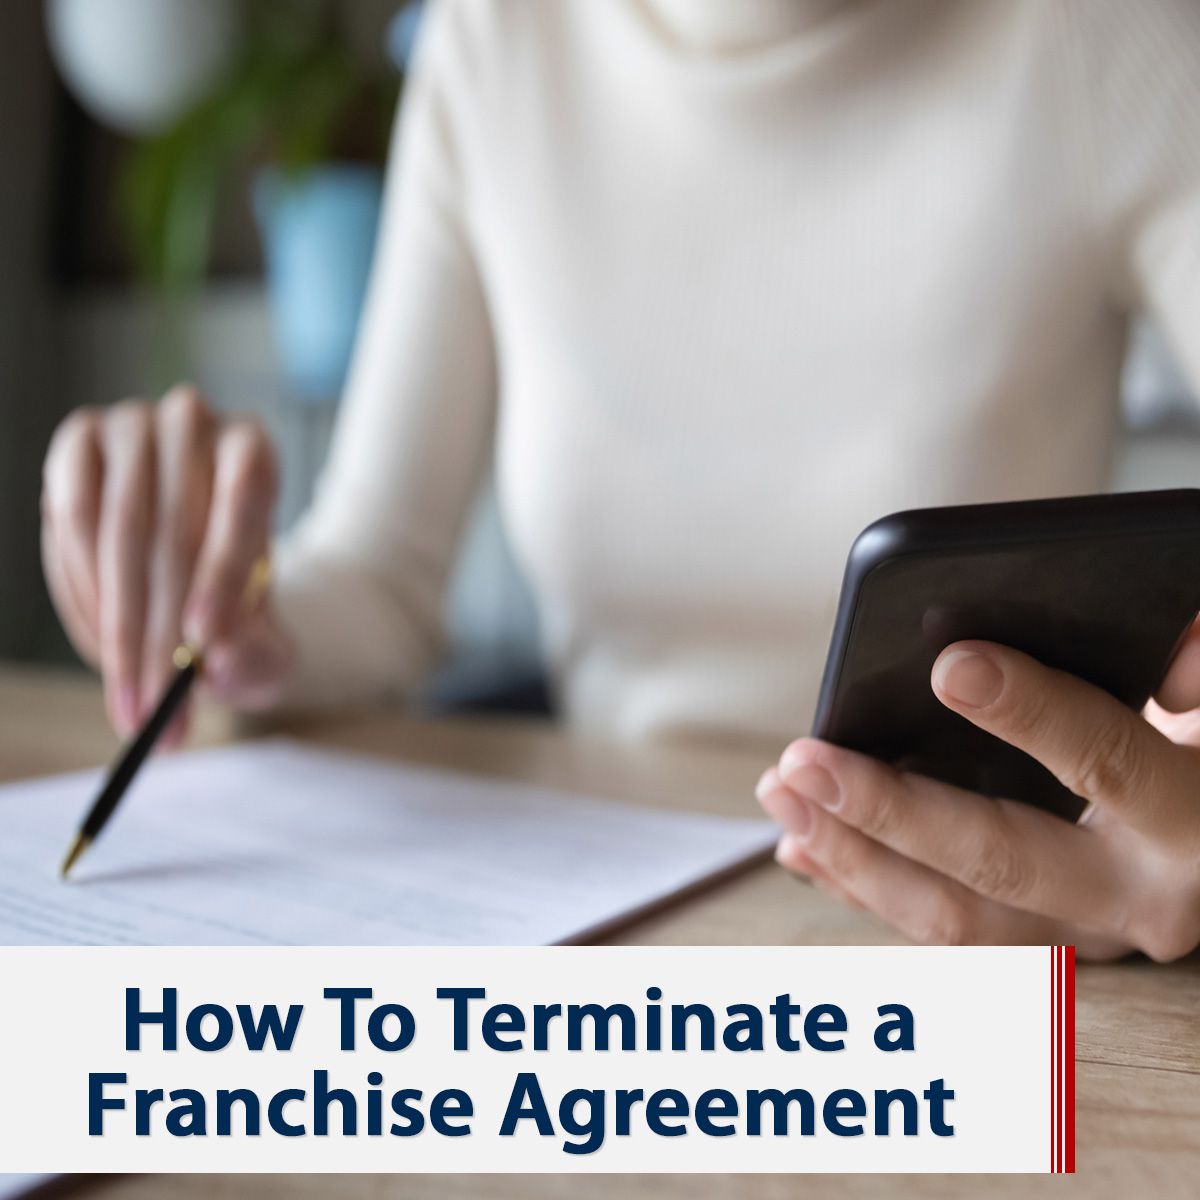 How To Terminate a Franchise Agreement